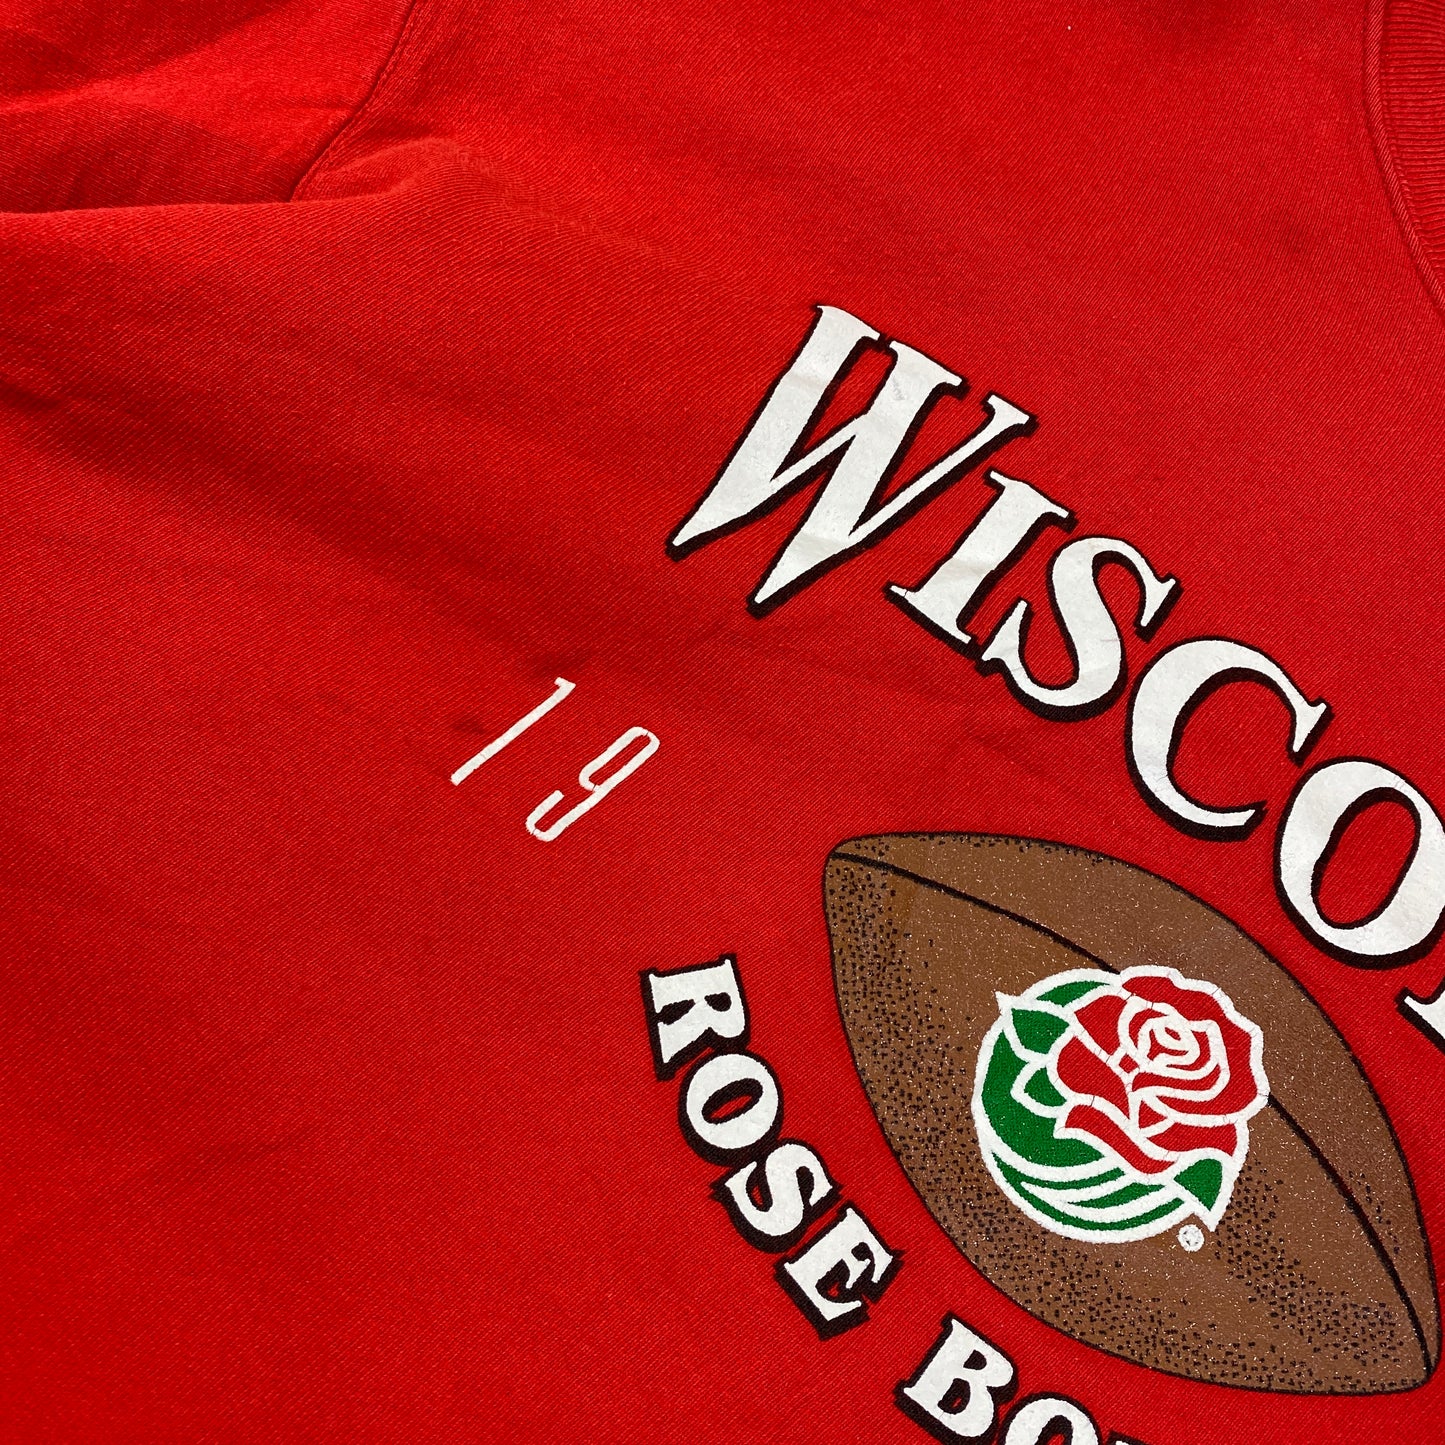 Wisconsin Rose Bowl sweater (L)